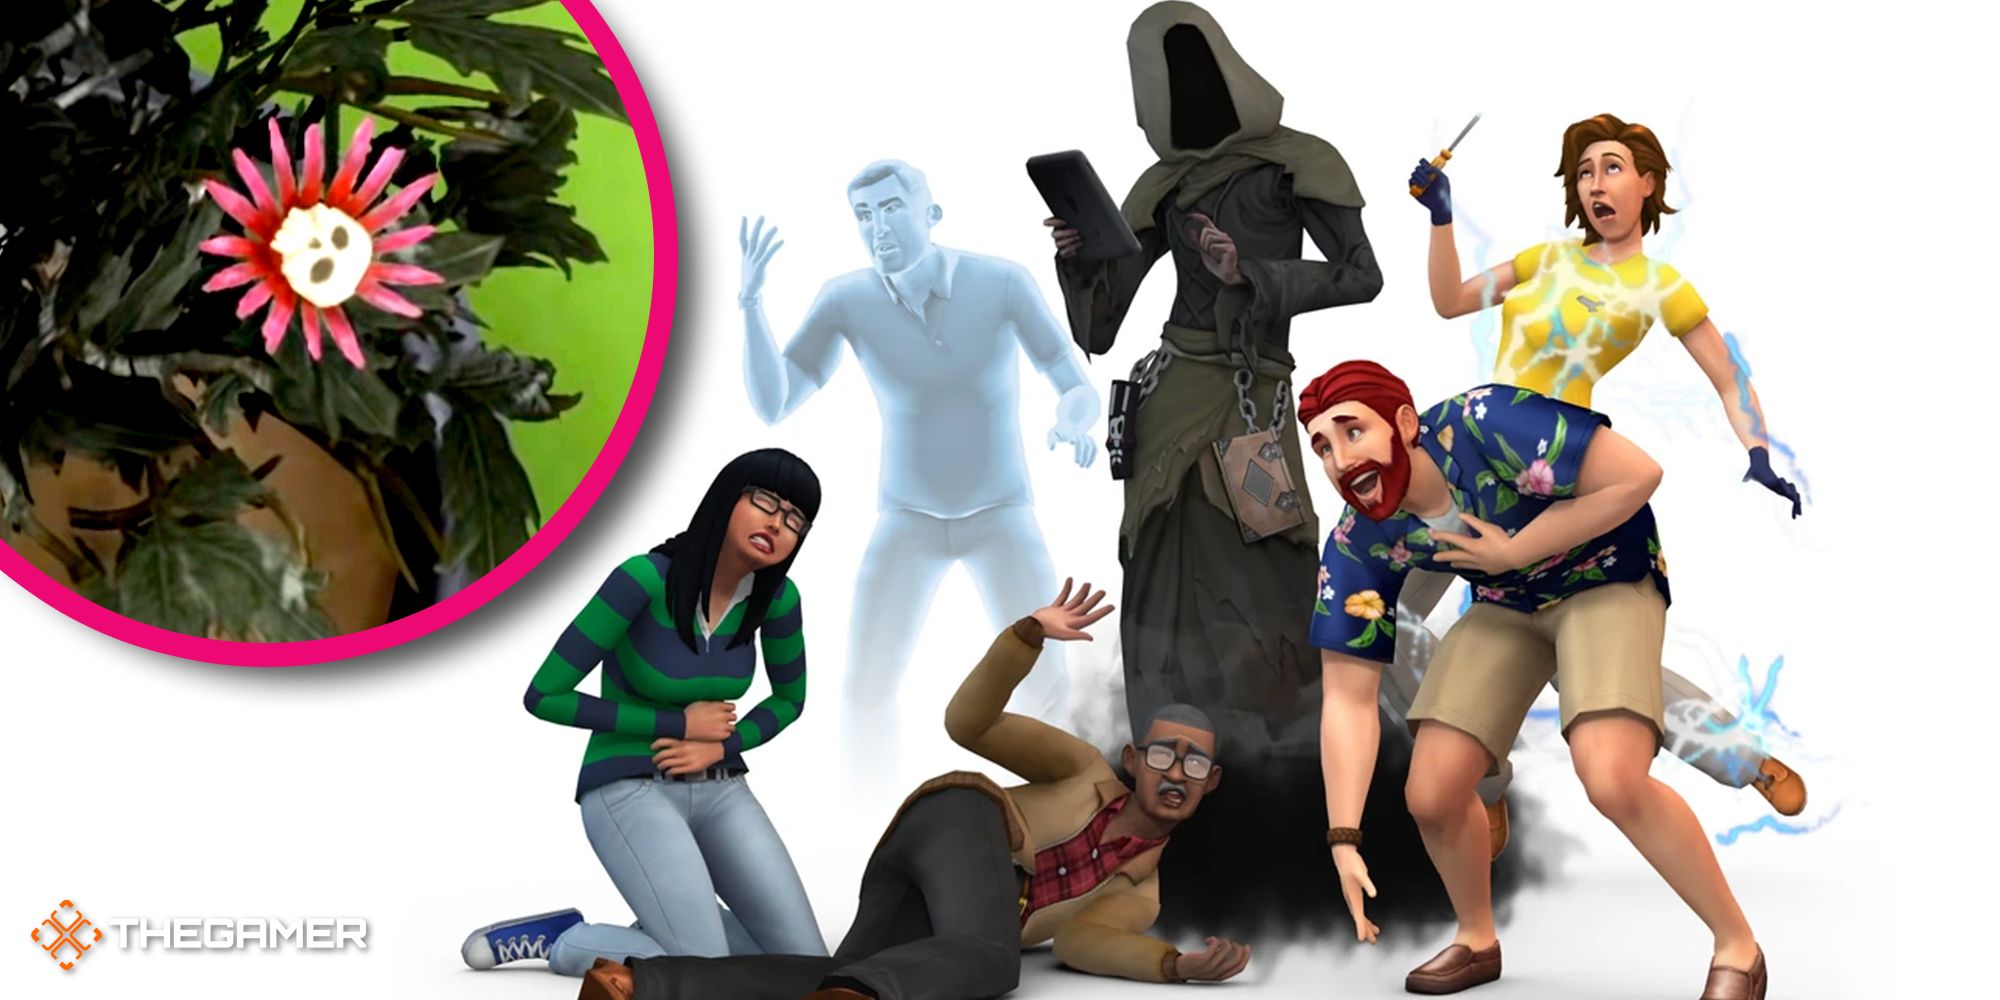 Game art and screen from The Sims 4.